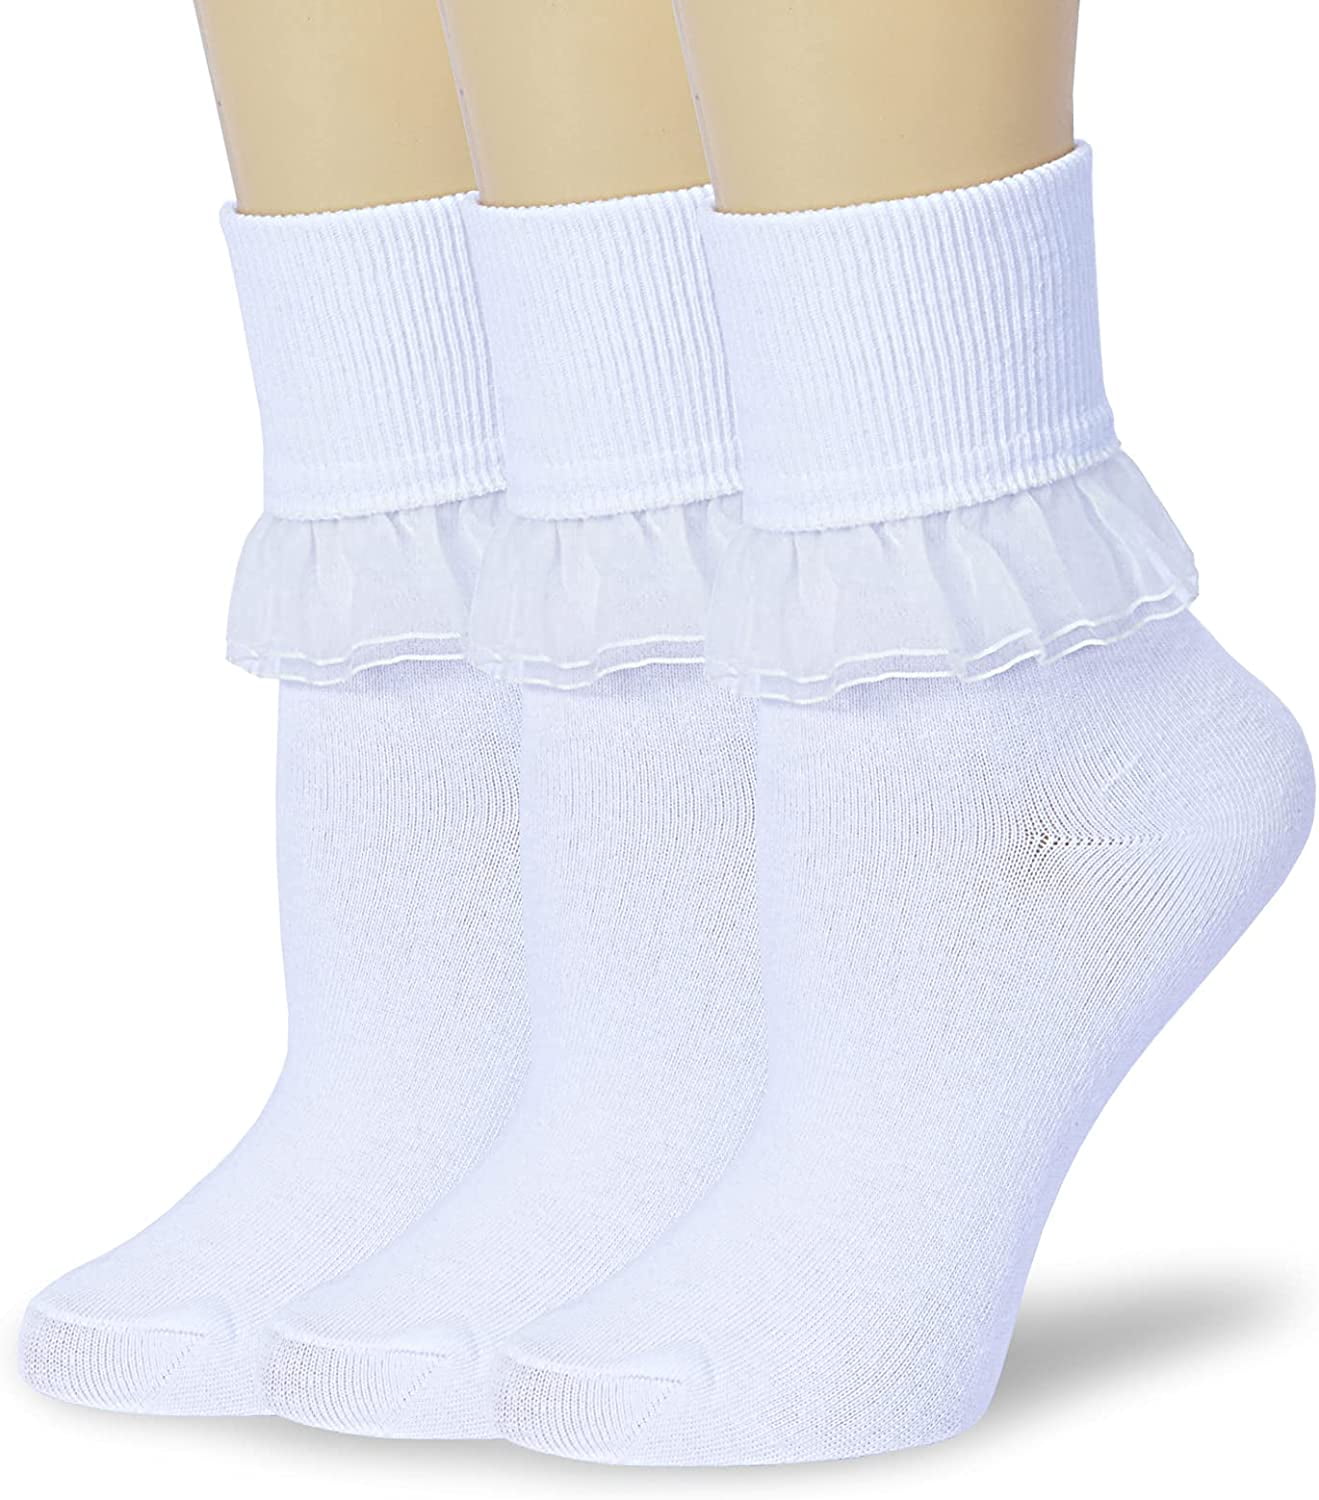 Ladies Cute Unique Colorful Cotton Rib Knitted Ankle/Crew Lace Trim Socks 1 Pair 